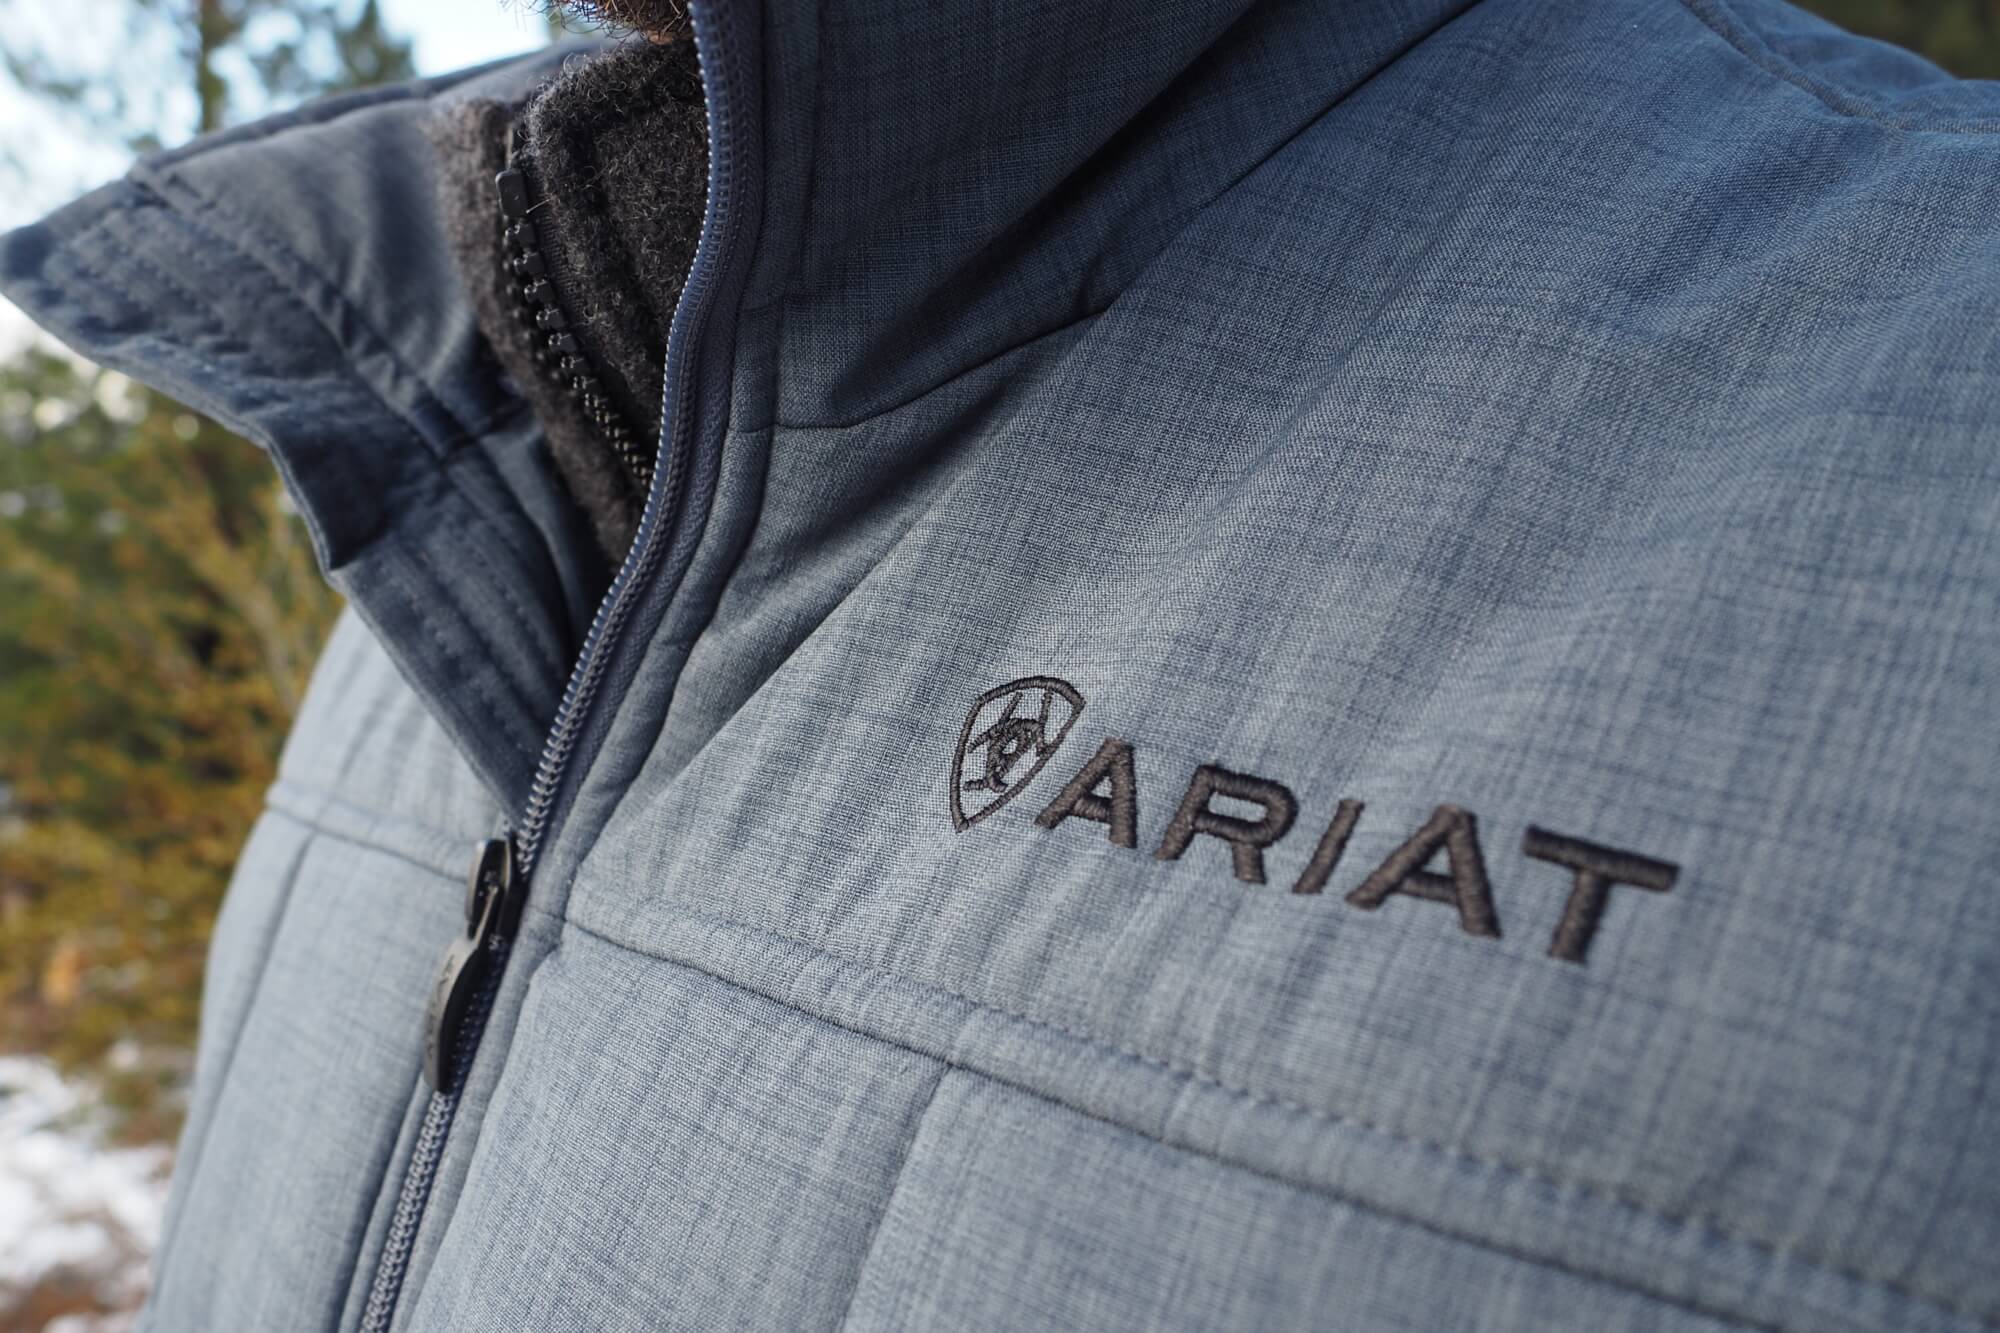 Ariat Crew Company Apparel and Footwear for Your Team